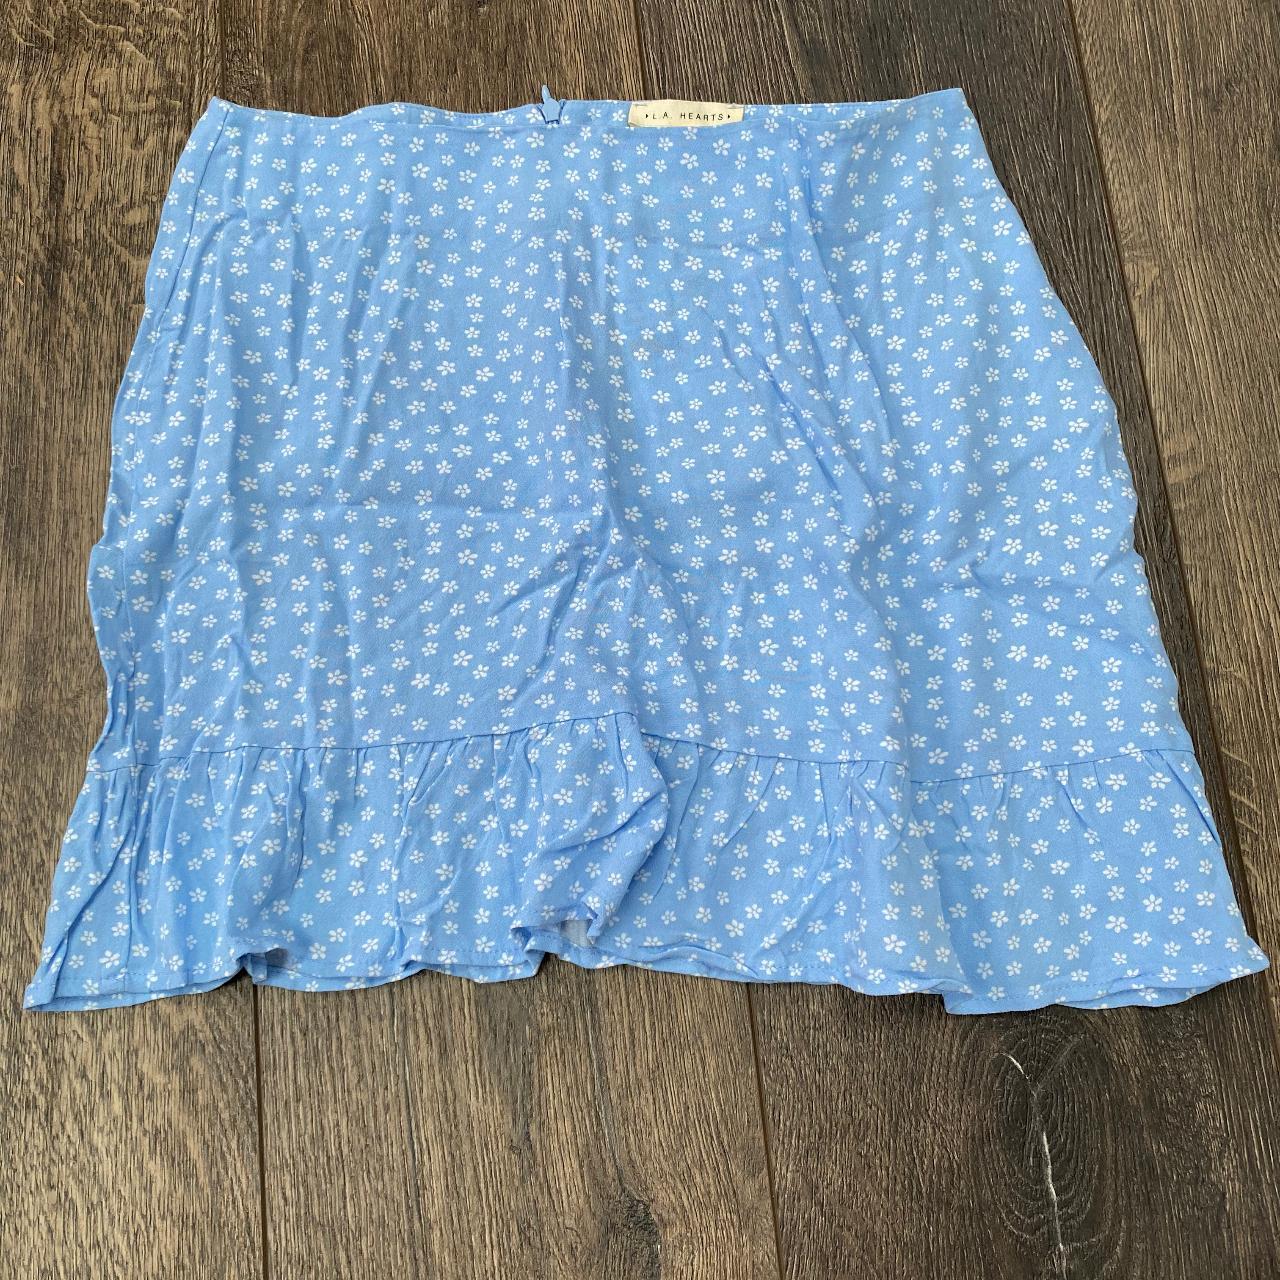 PacSun Women's Blue and White Skirt